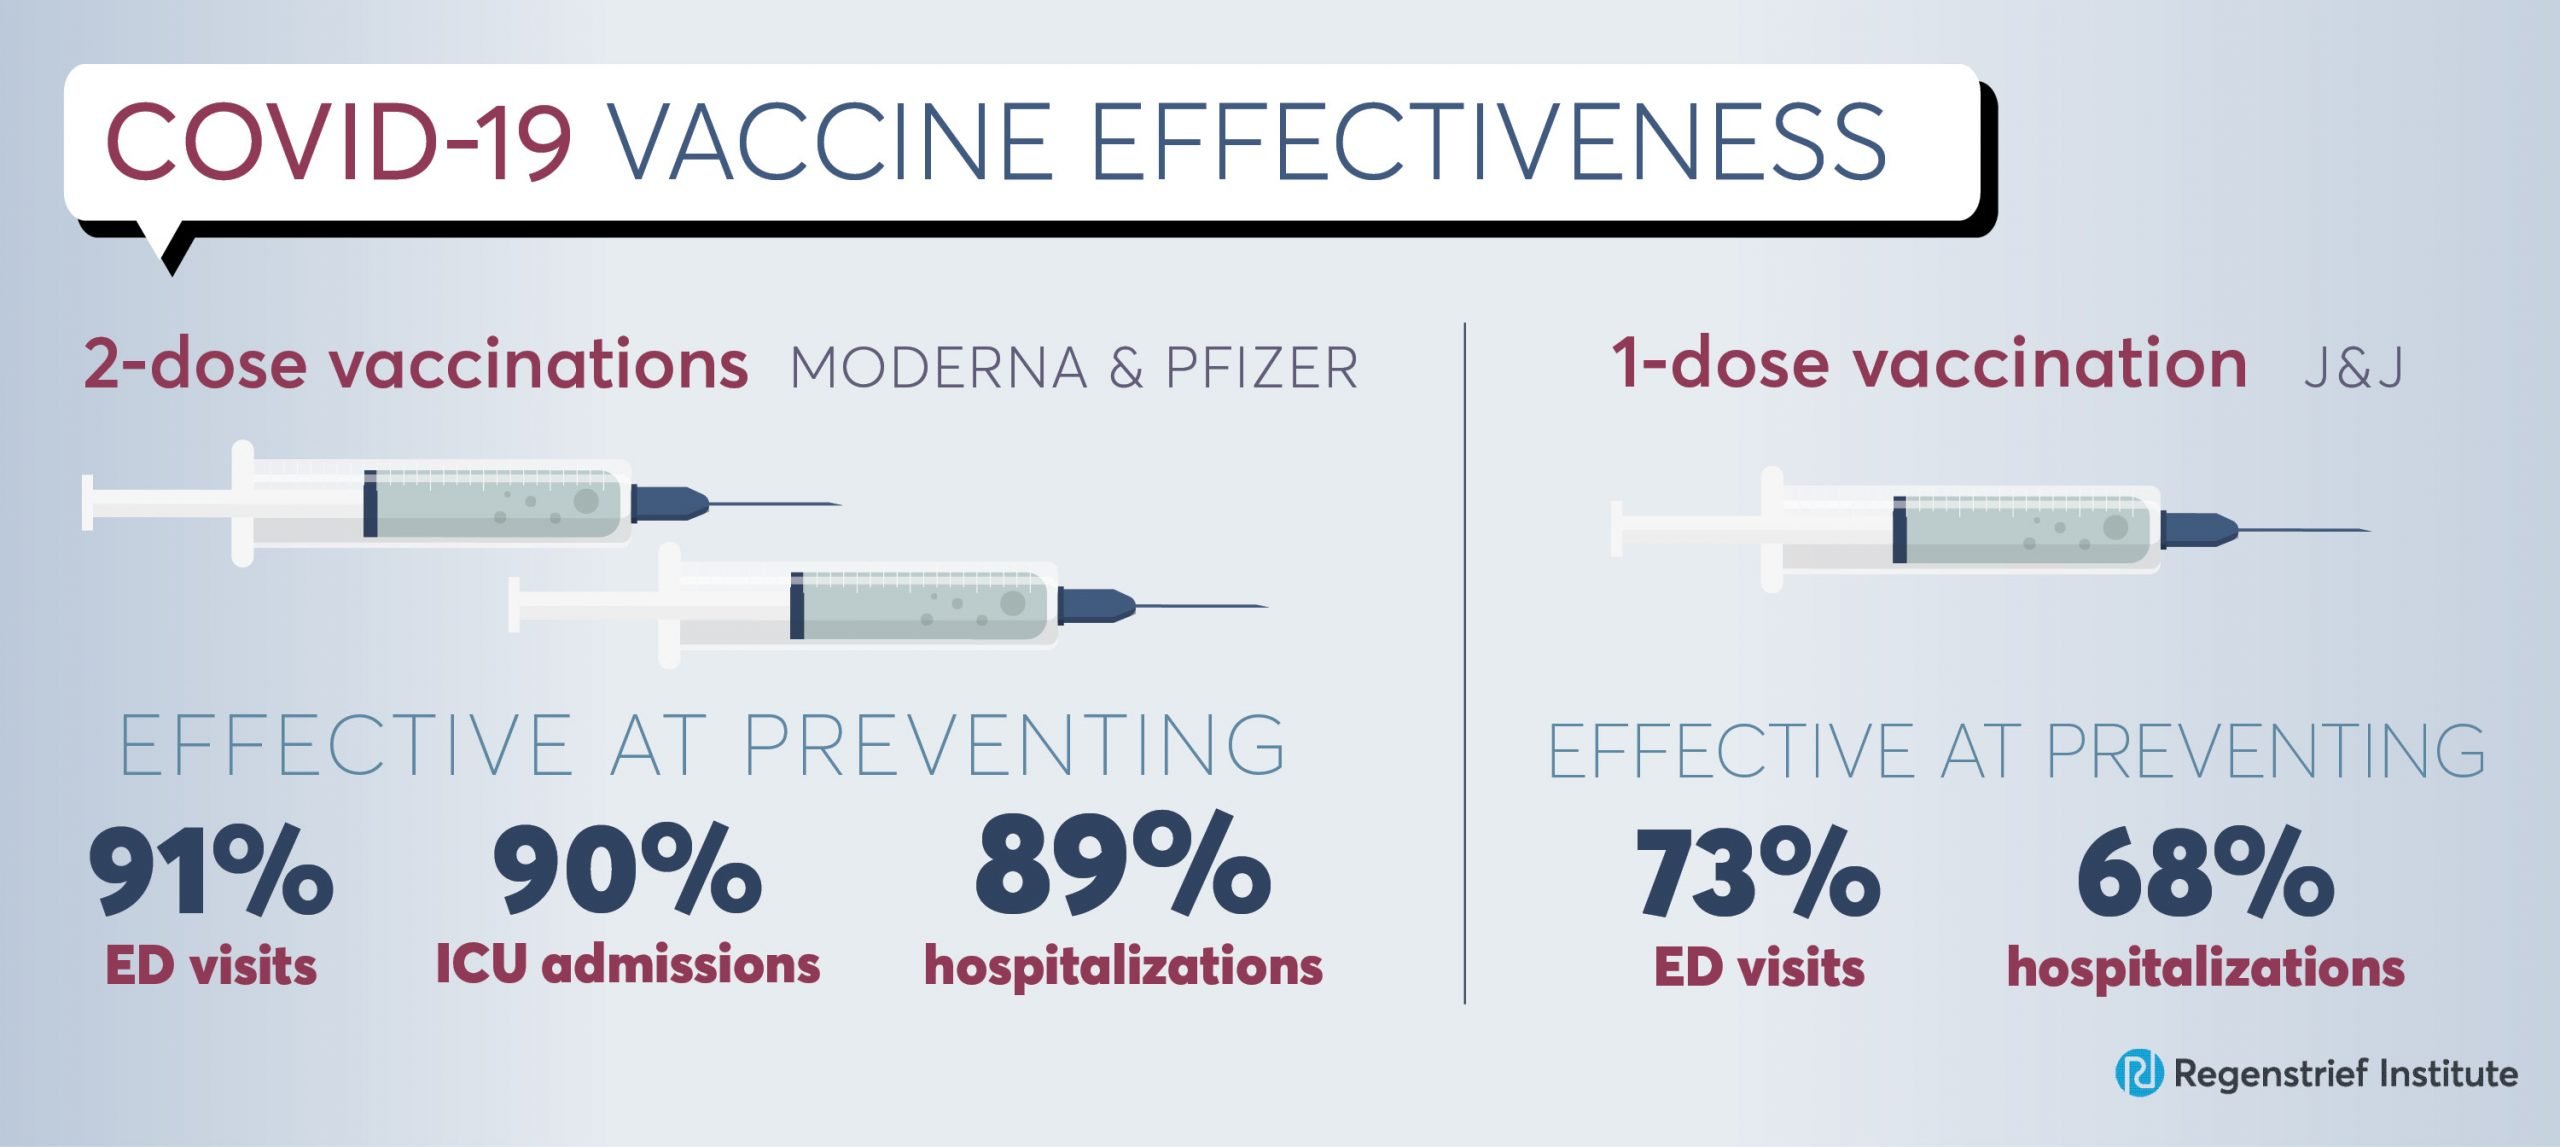 Graphic showing 2 dose vaccinas are 91% effective at preventing hospitalizations, 90% at preventing ICU admissions and 89% at preventing ICU admissions